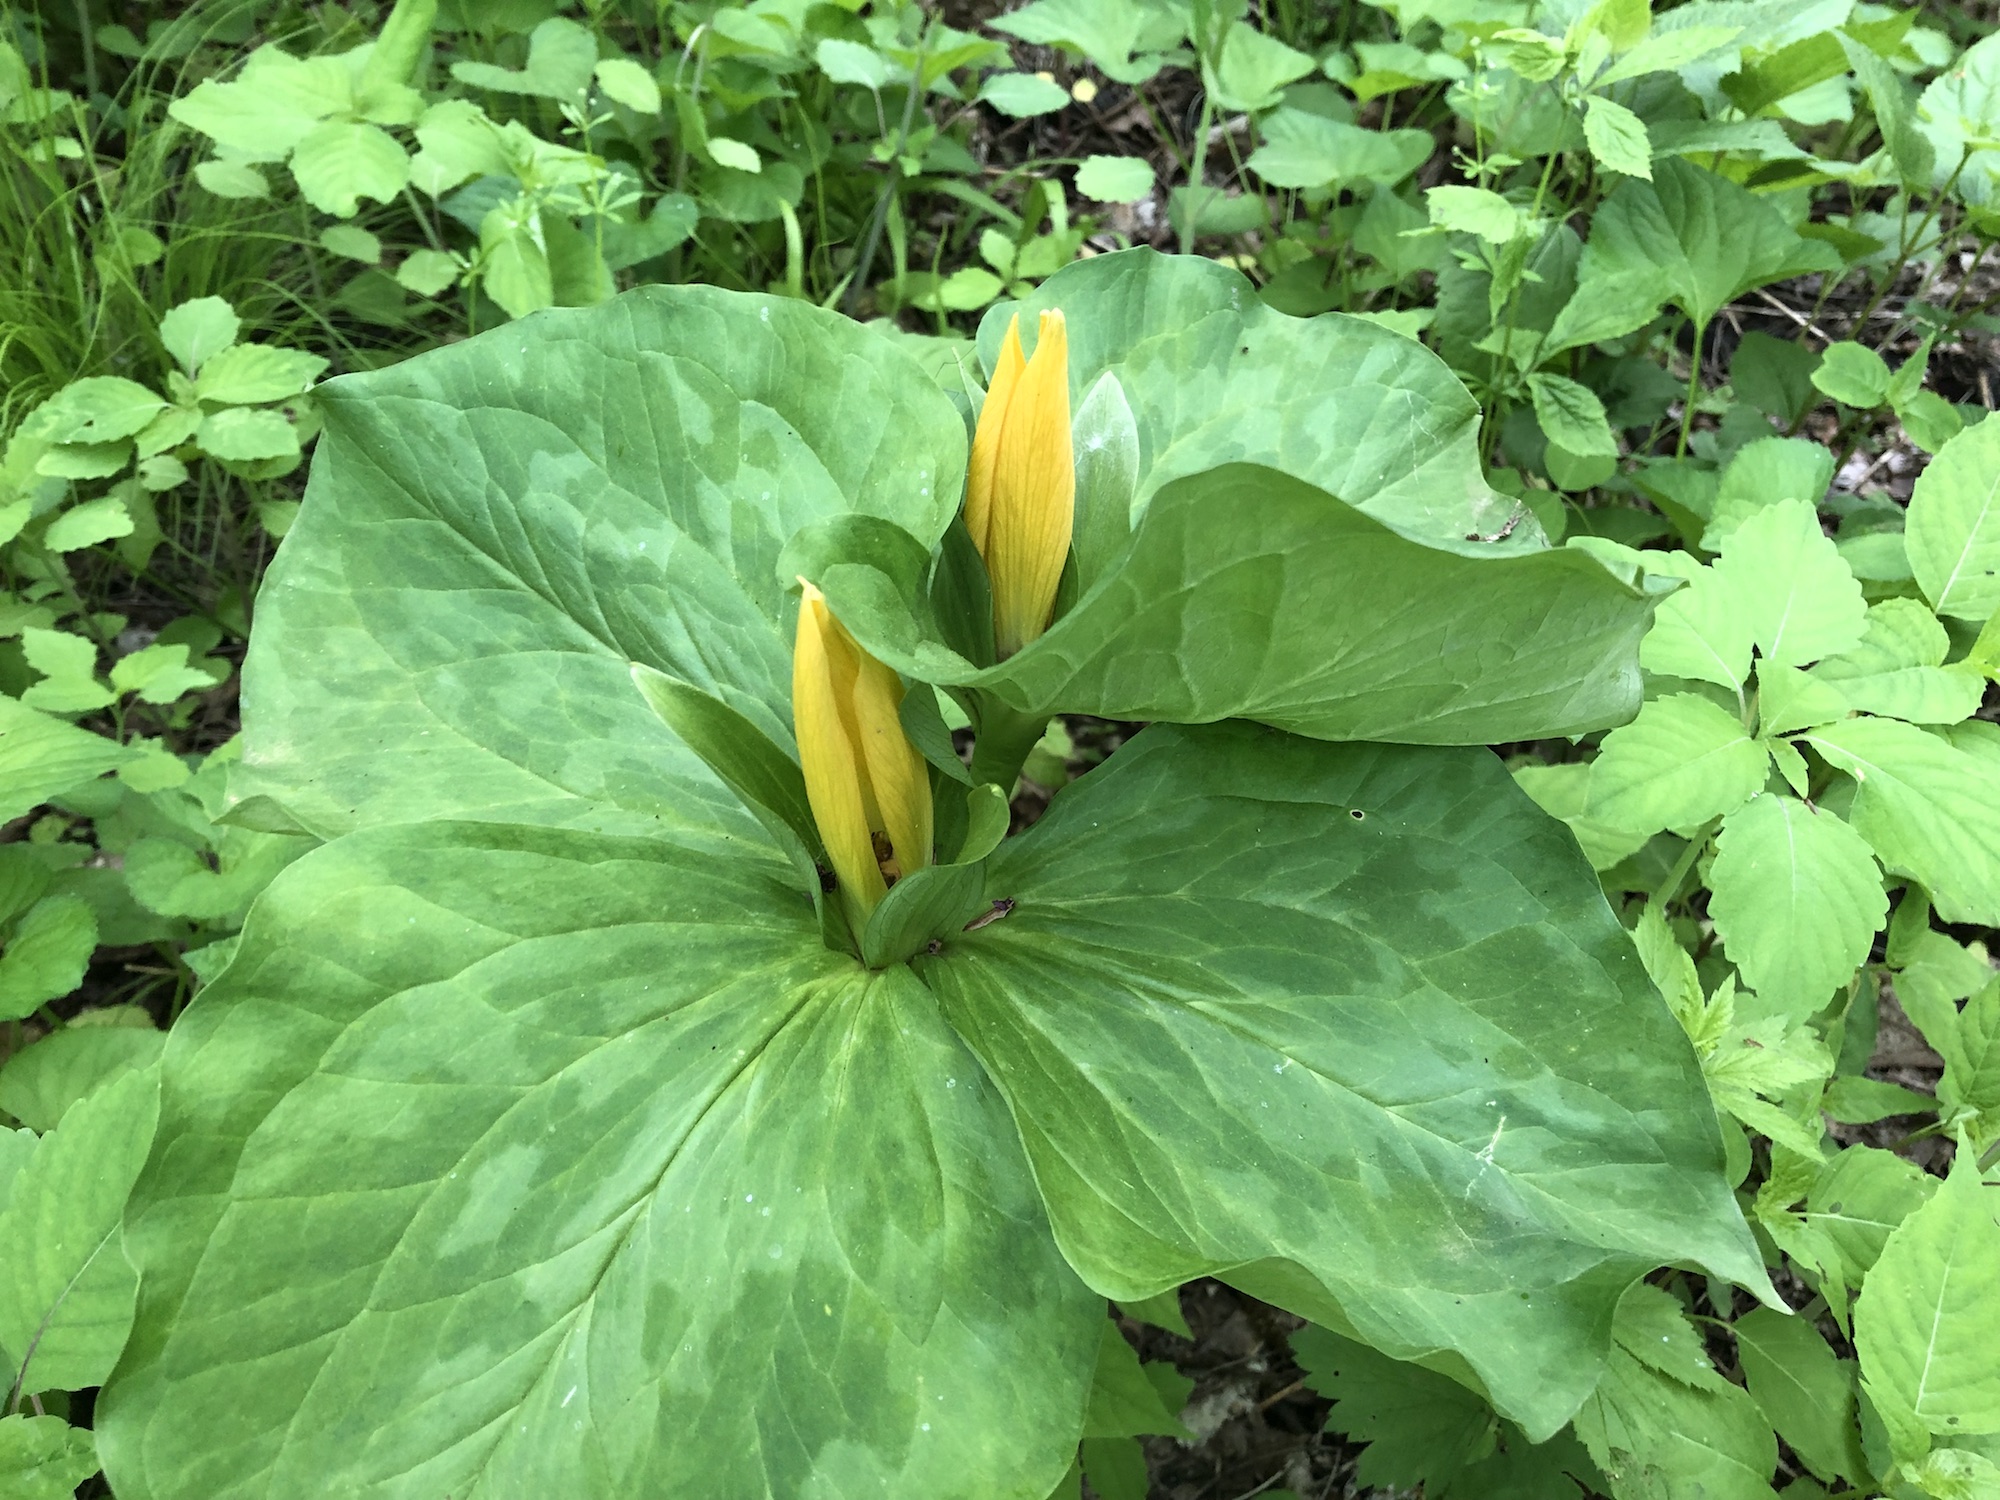 Trillium off of bike path between Marion Dunn and Duck Pond on June 3, 2019.